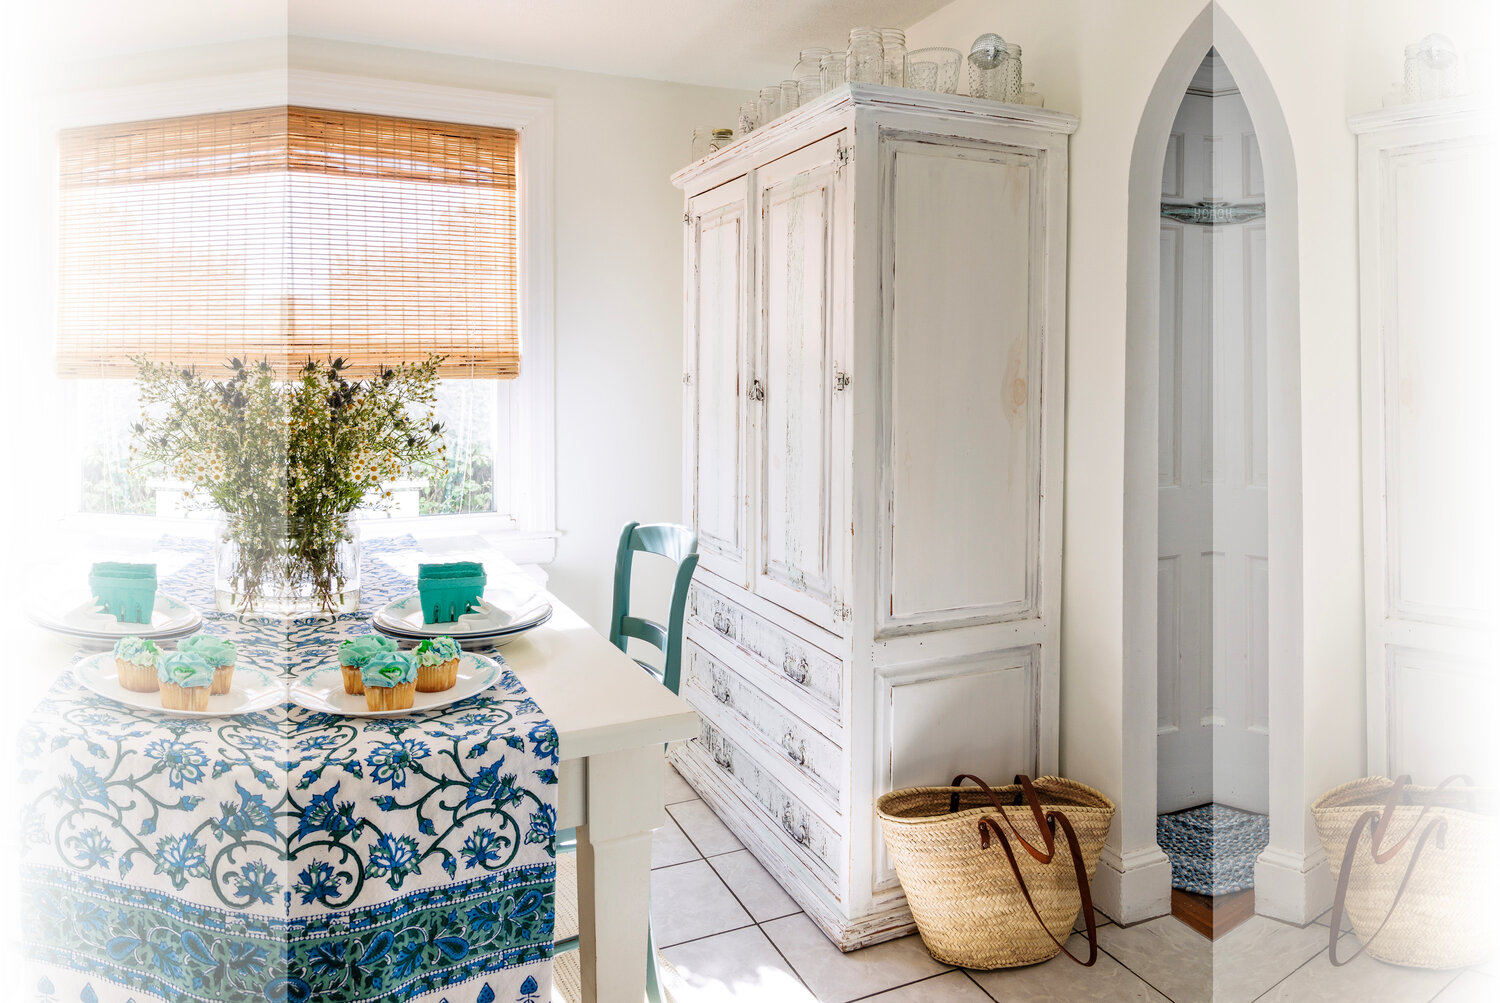 The armoire was bought for its versatile storage possibilities. Major painted it white with an aqua stripe, and it holds everything from dishware to tea towels and small appliances